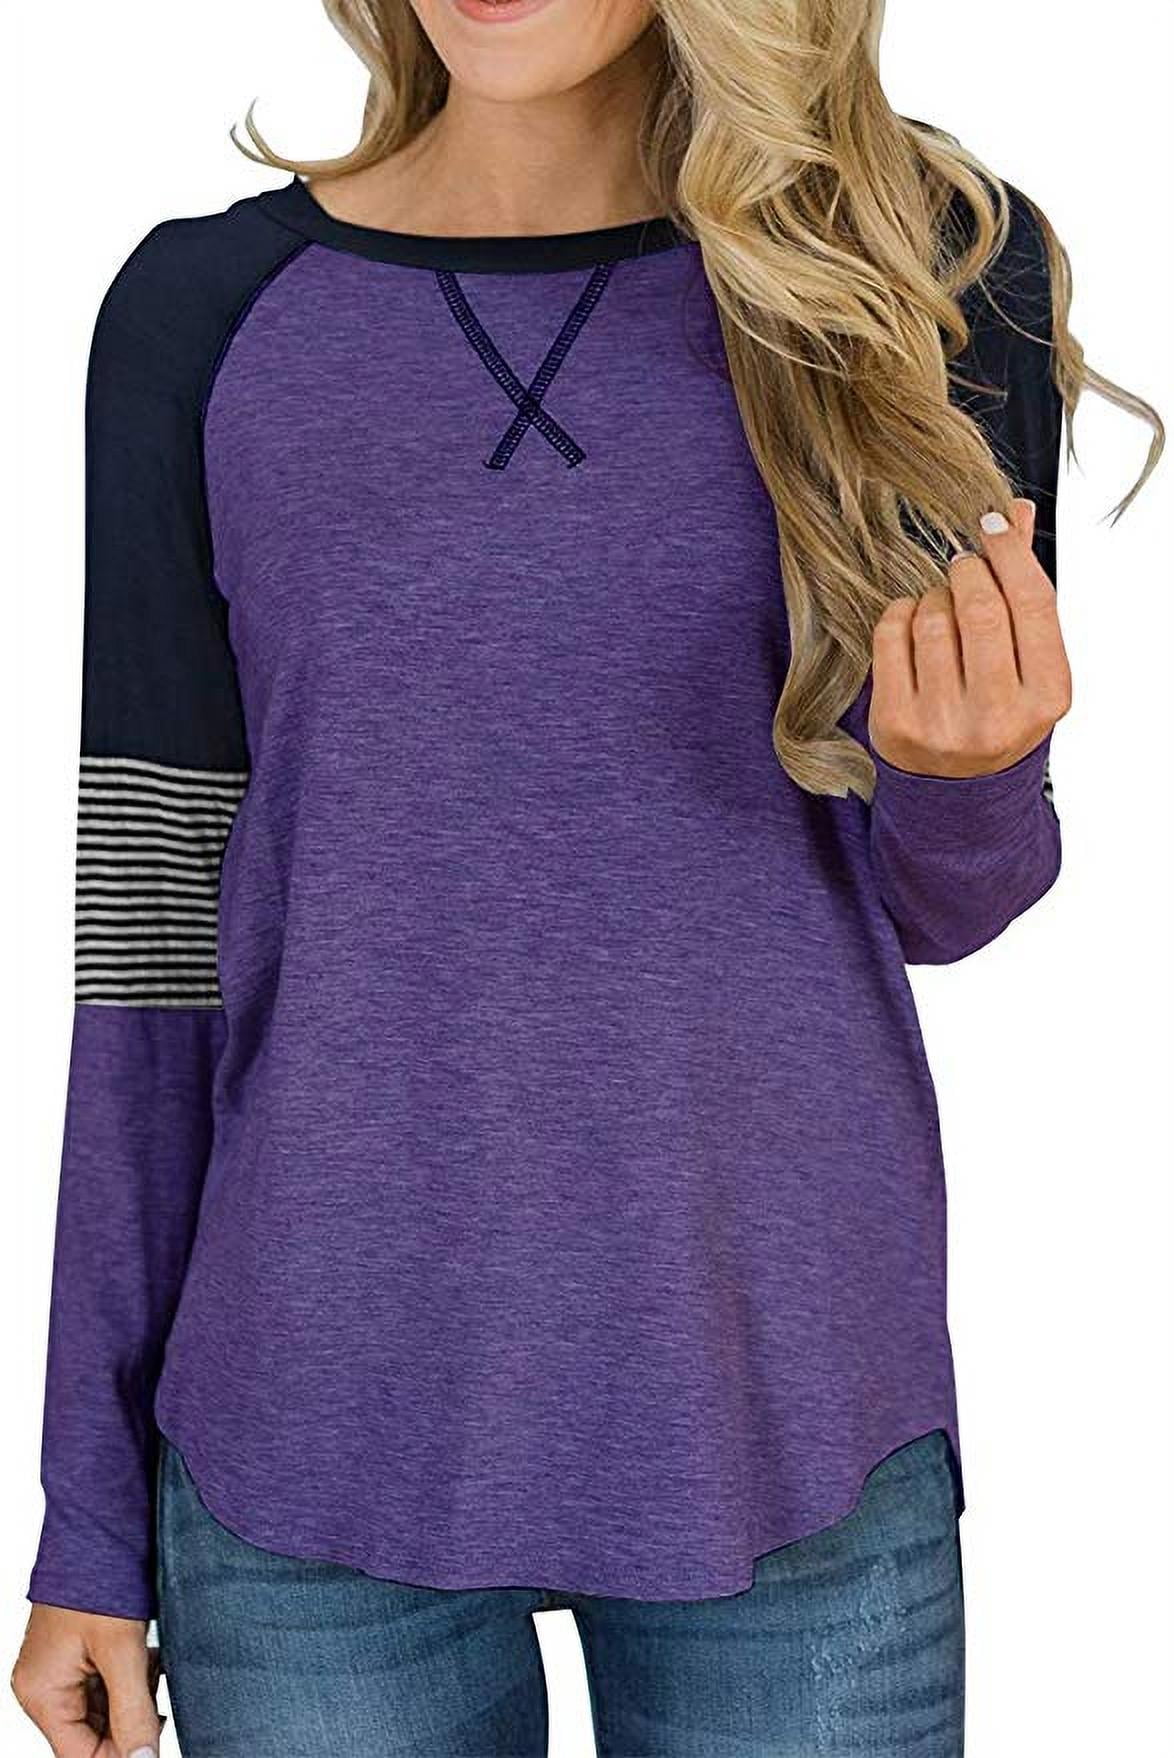 Women's Color Block Round Neck Tunic Tops Casual Long Sleeve and Short ...